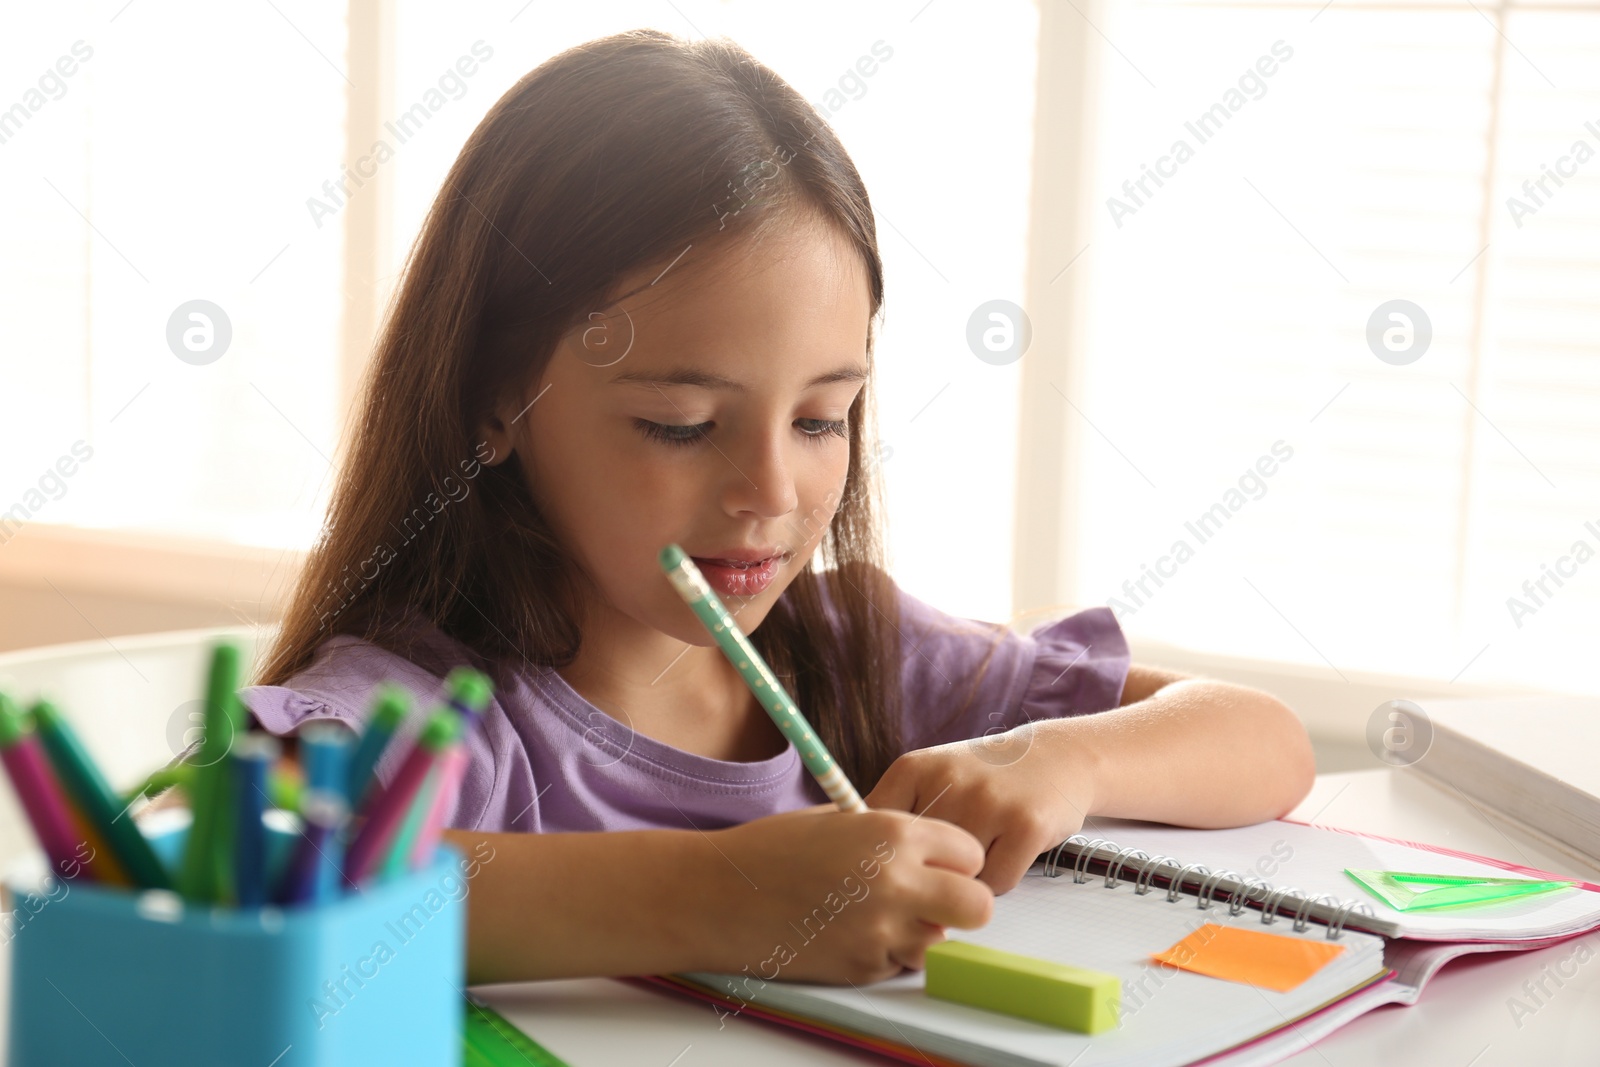 Photo of Little girl doing homework at table indoors